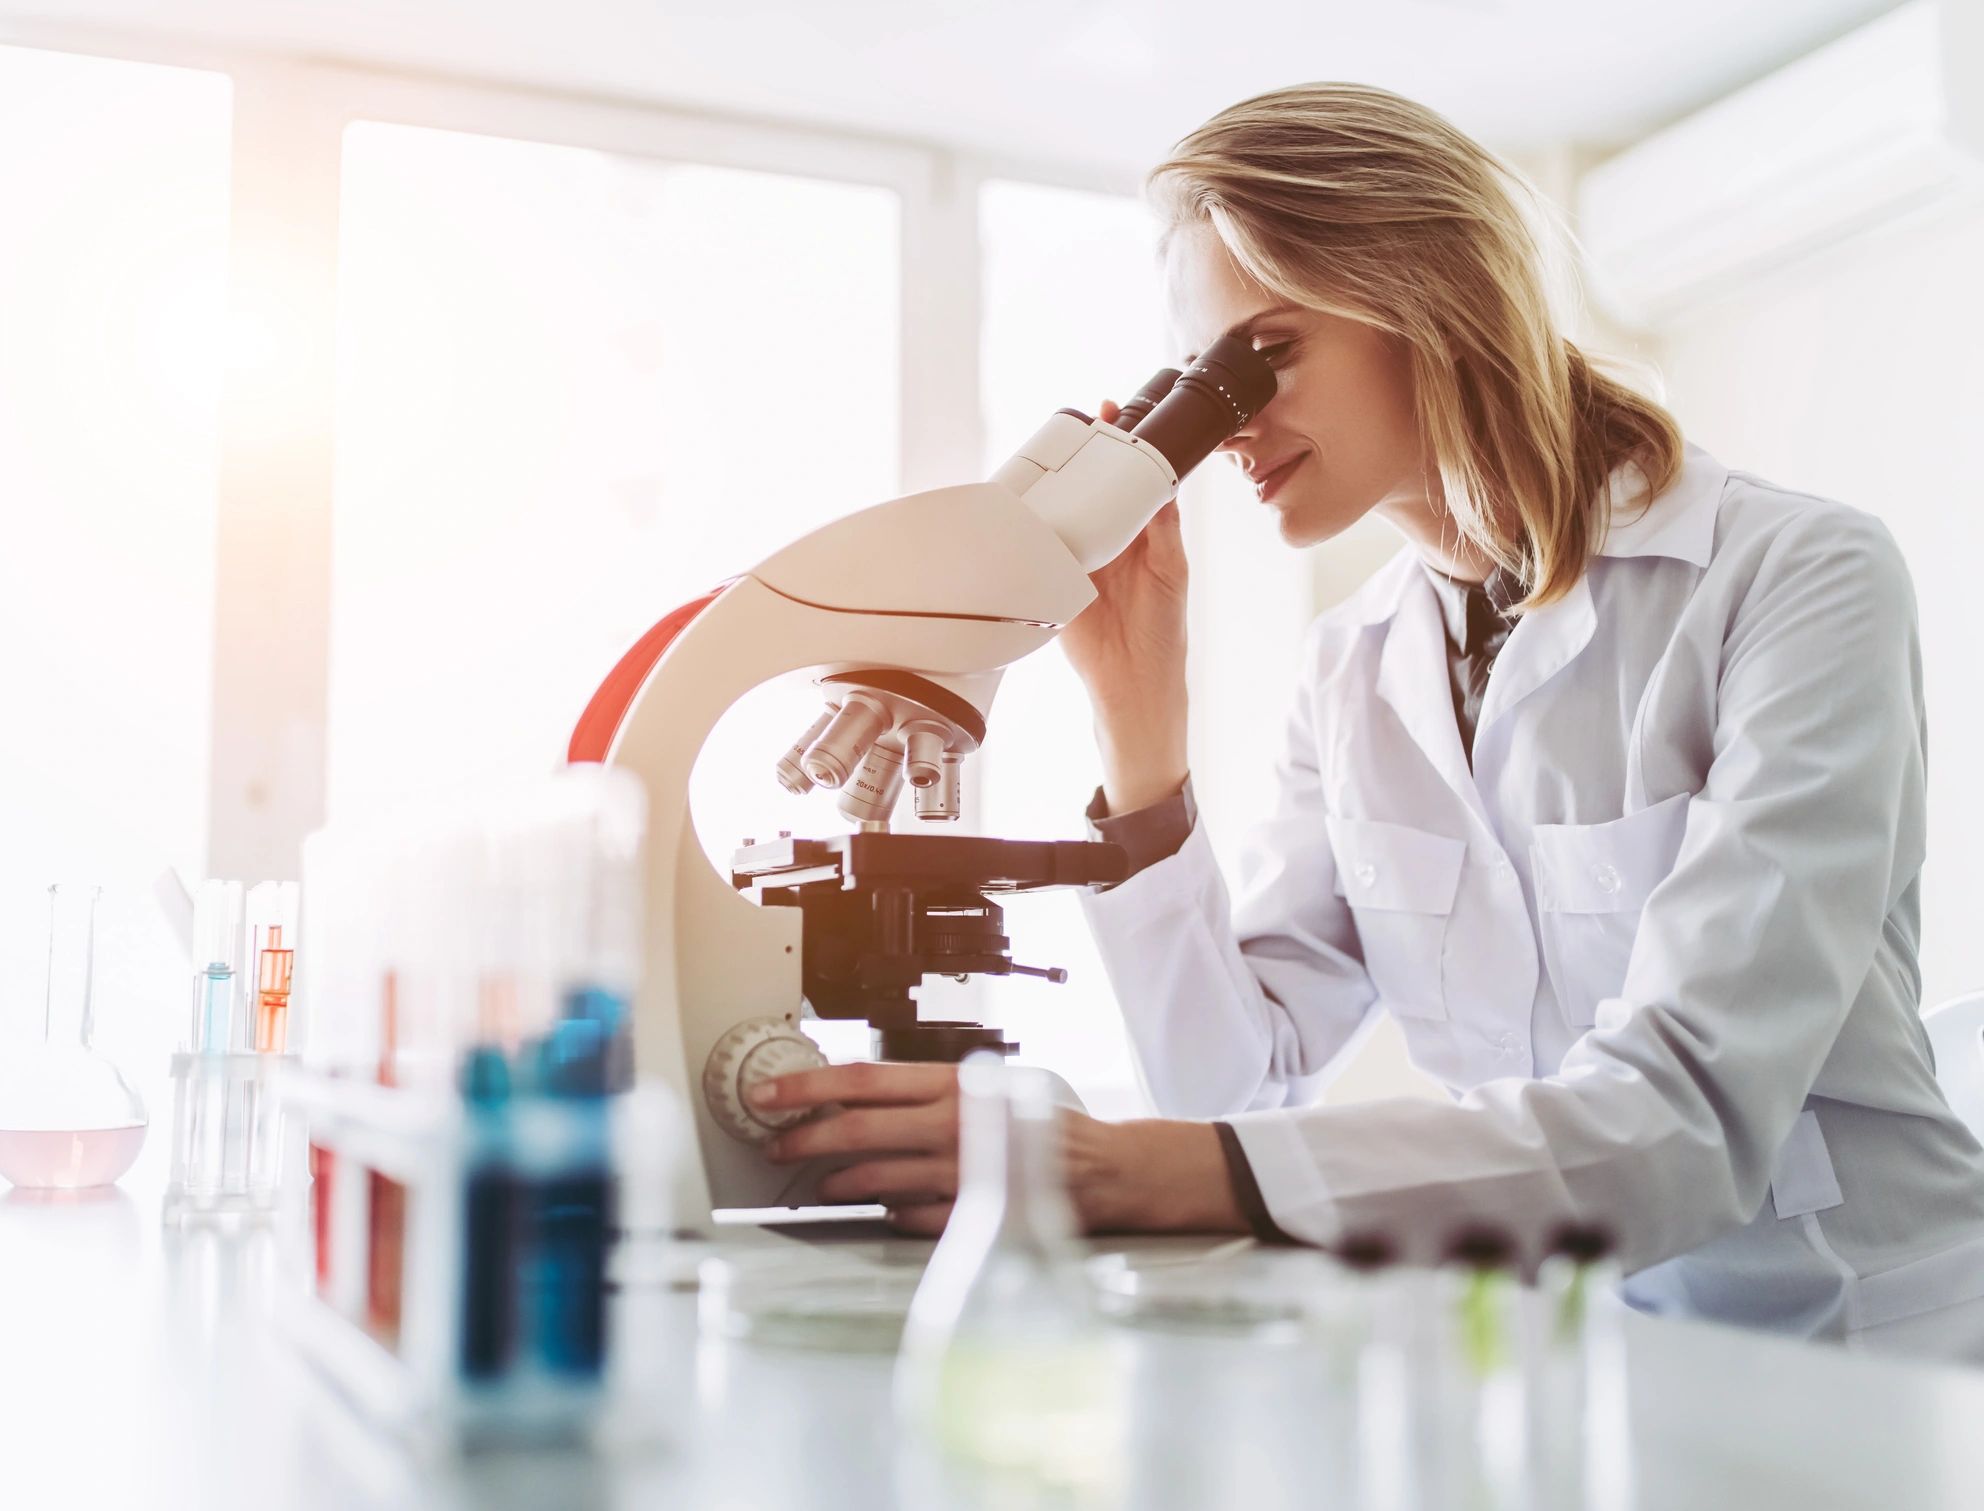 Woman Lab Technician looking into binocular compound microscope in a lab setting